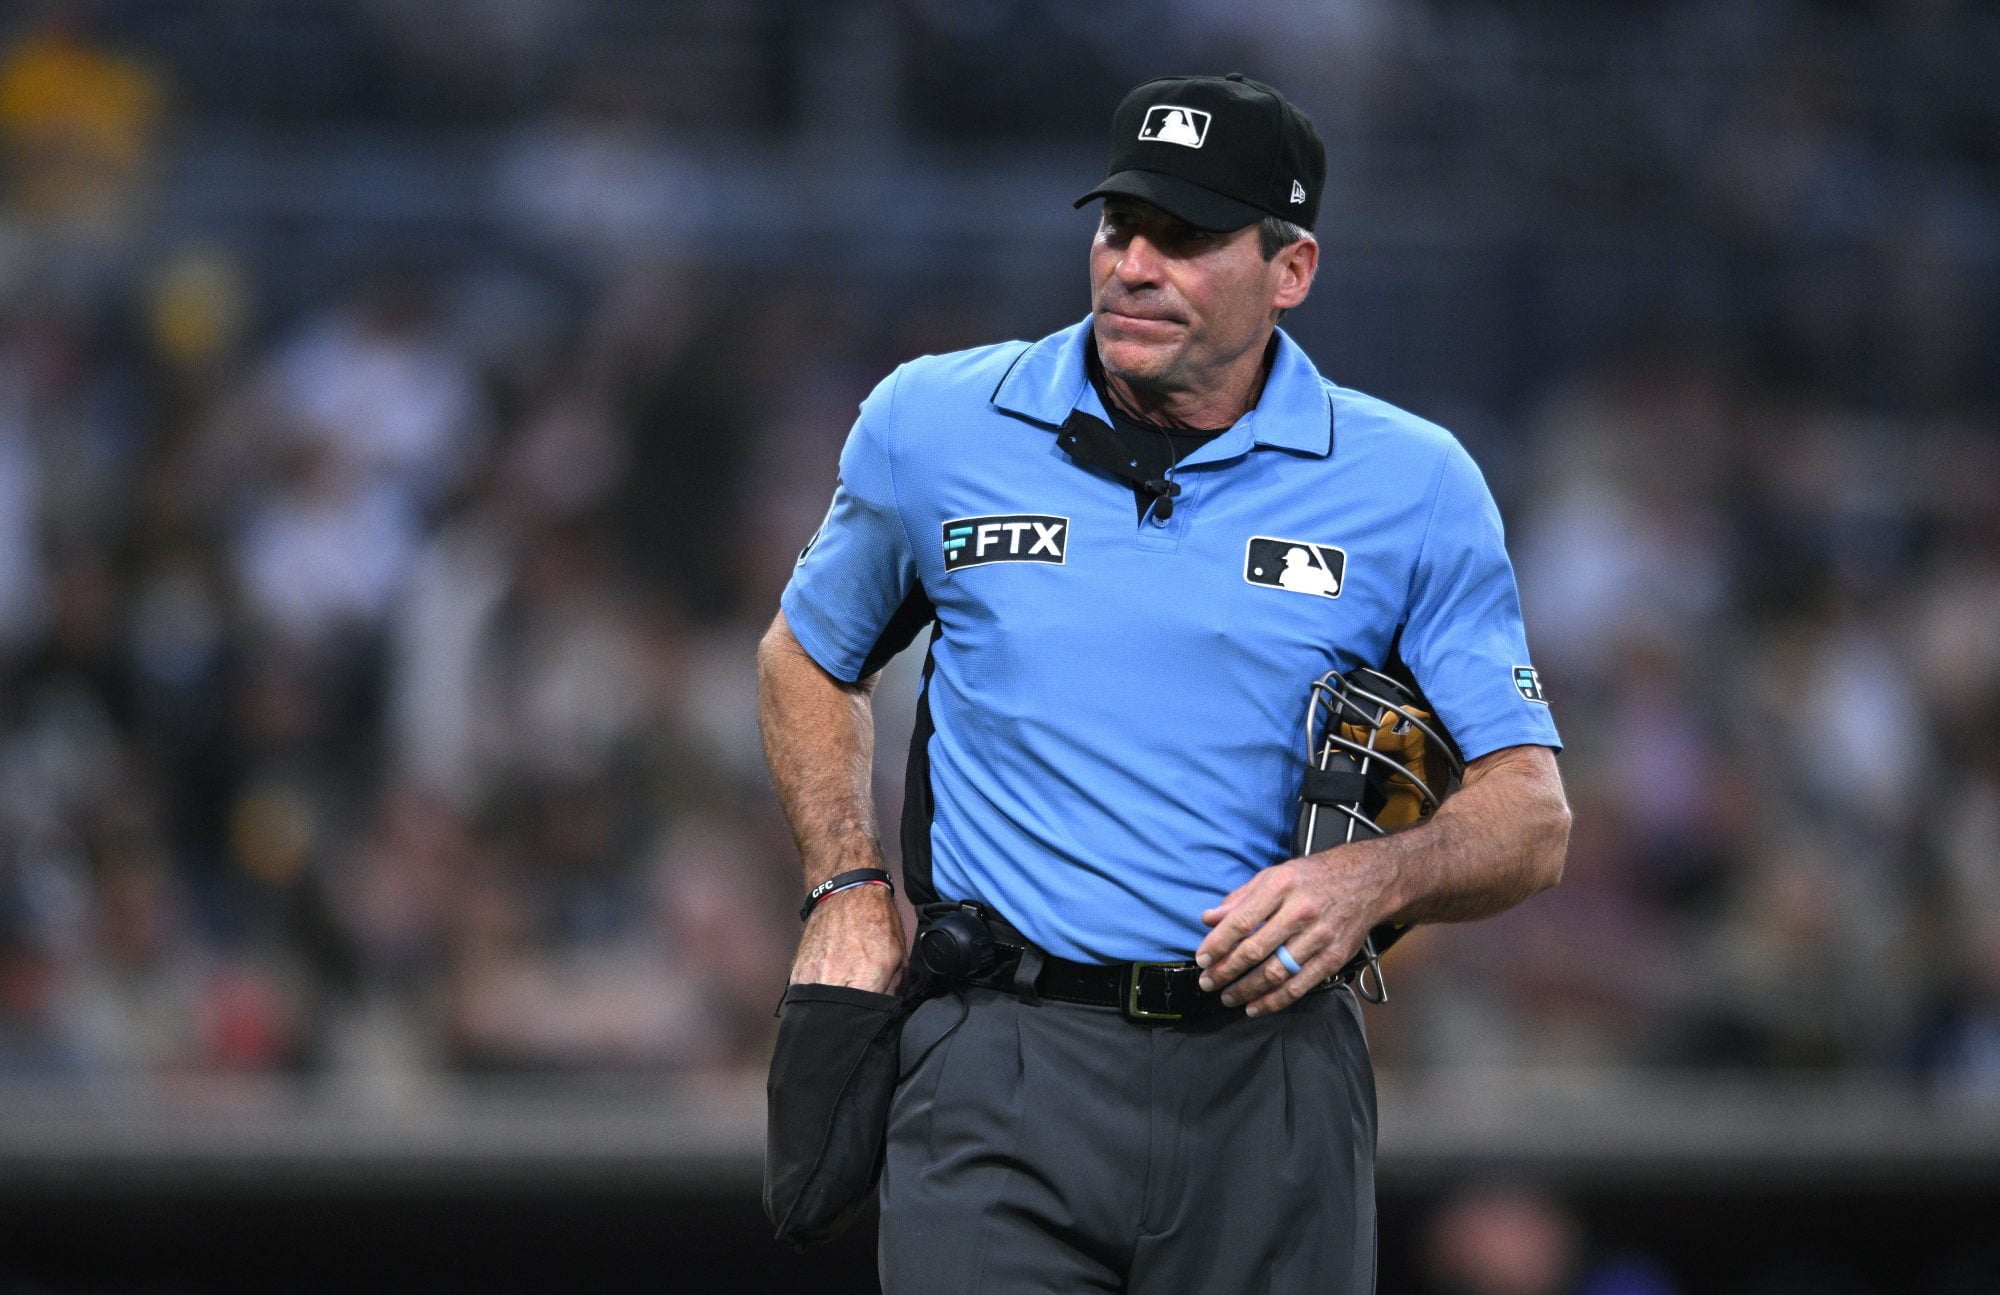 MLB Will Drop FTX Patches For Umpires In 2023 But Partnership Dilemma  Remains